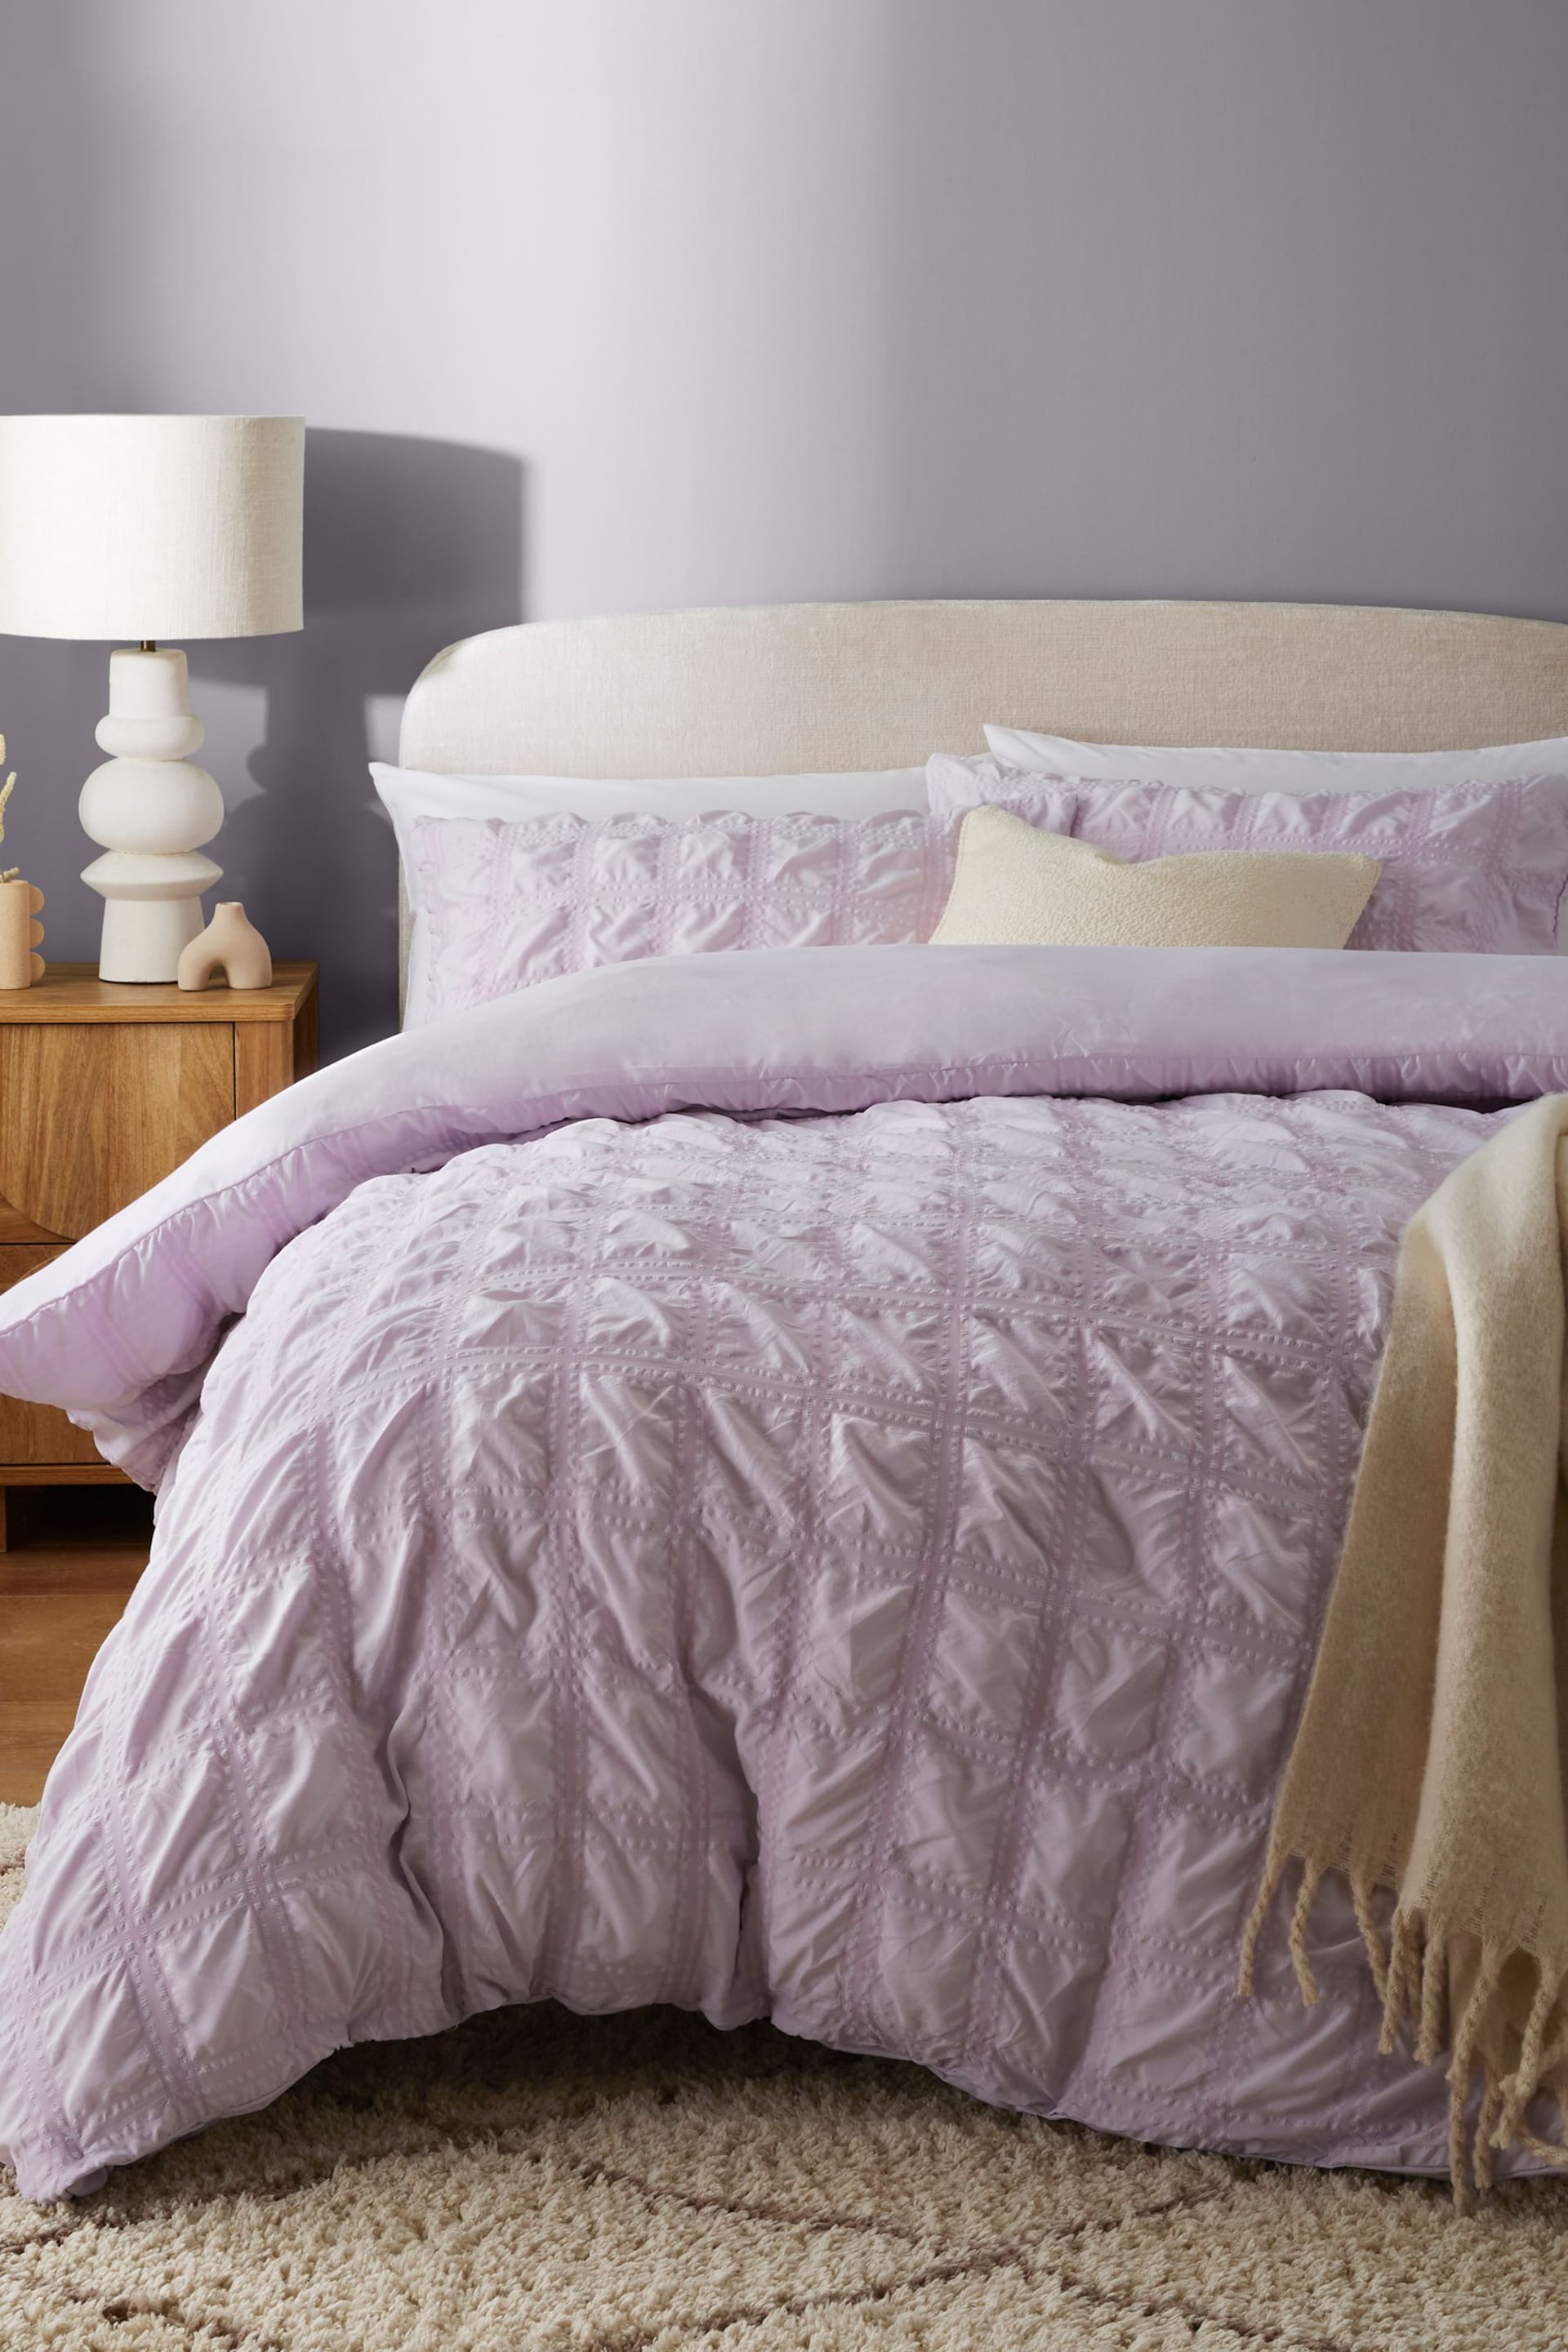 Lilac Purple Seersucker Supersoft Textured Duvet Cover and Pillowcase Set - Image 1 of 5